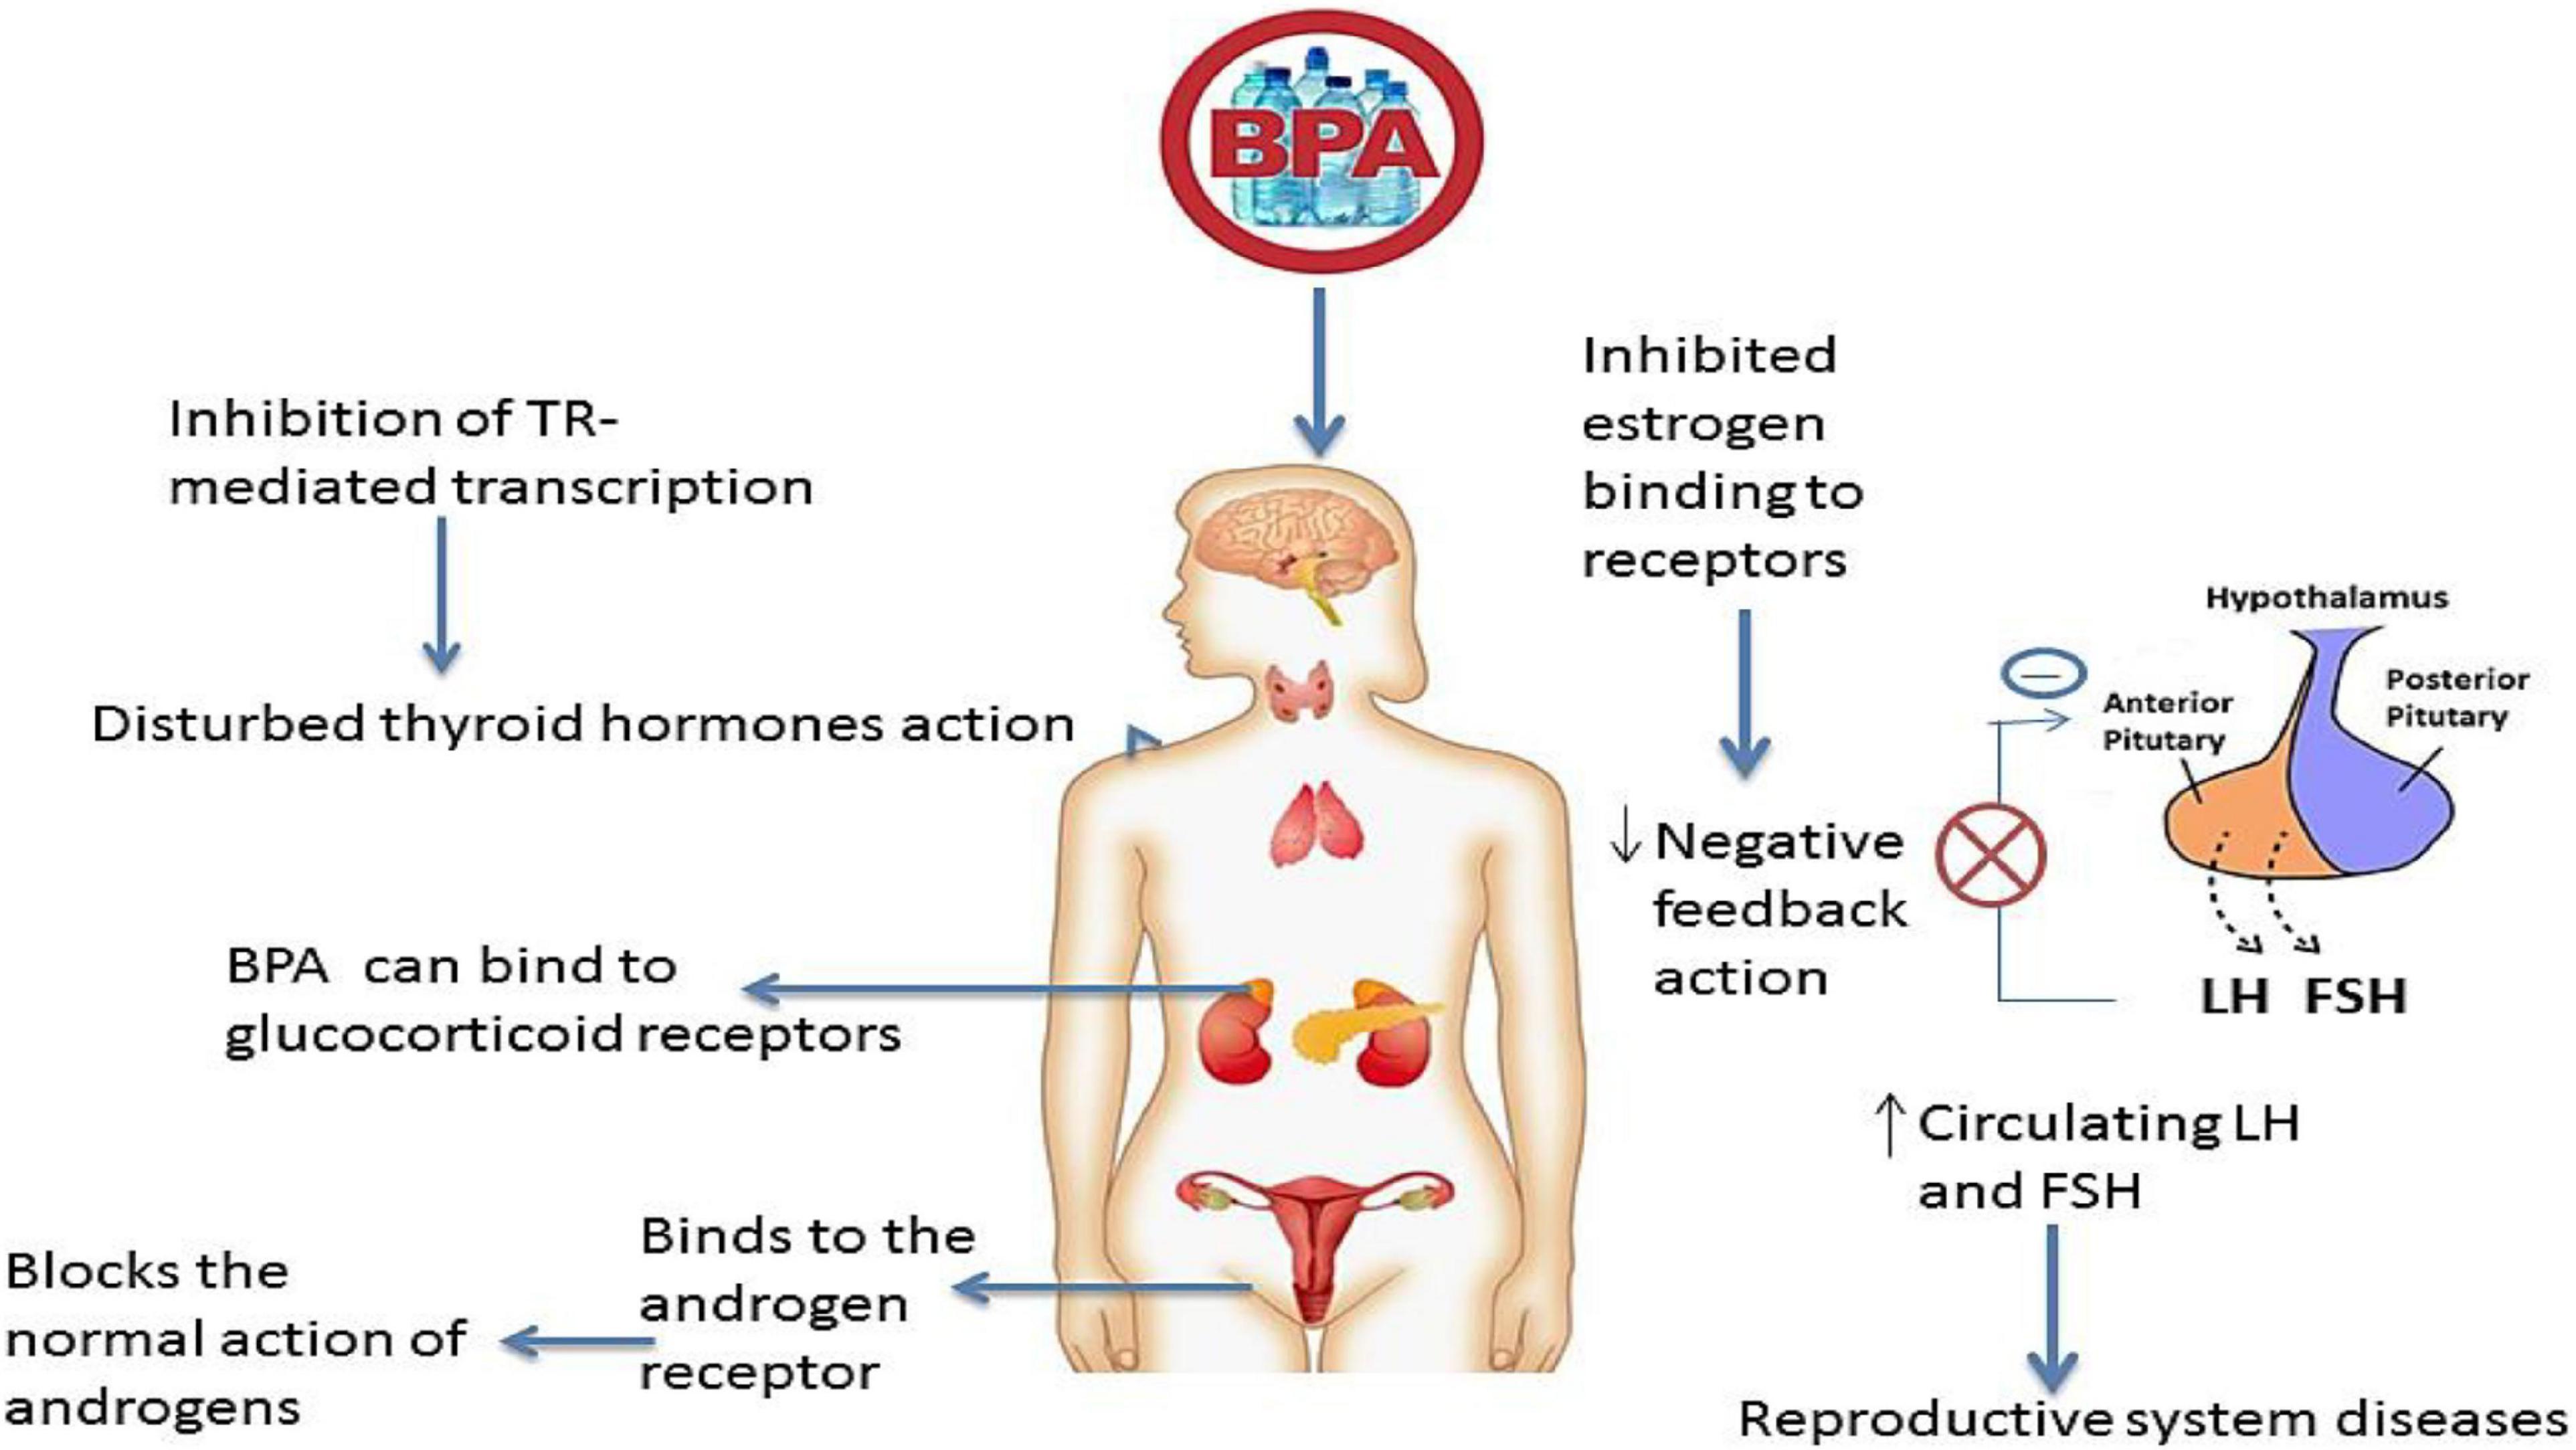 Department of Human Services  BPA - Bisphenol A - possible effects during  fetal development or on newborns